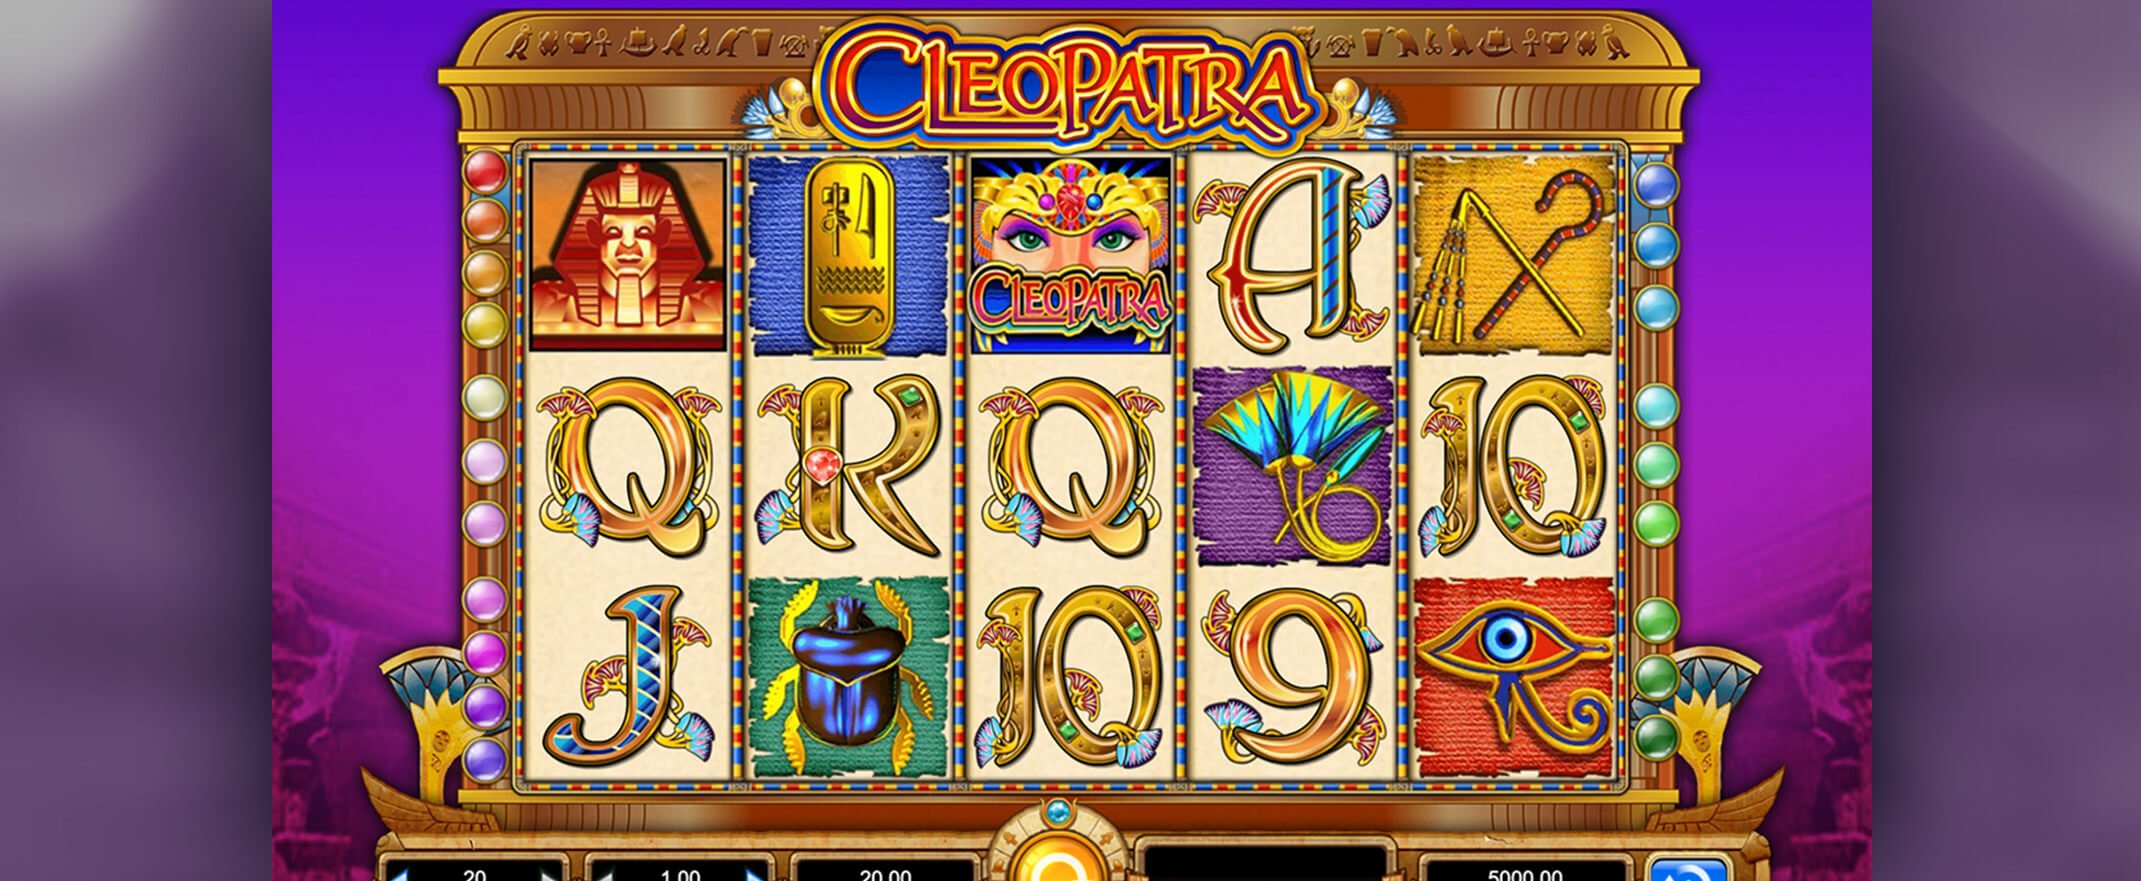 Cleopatra slot from IGT